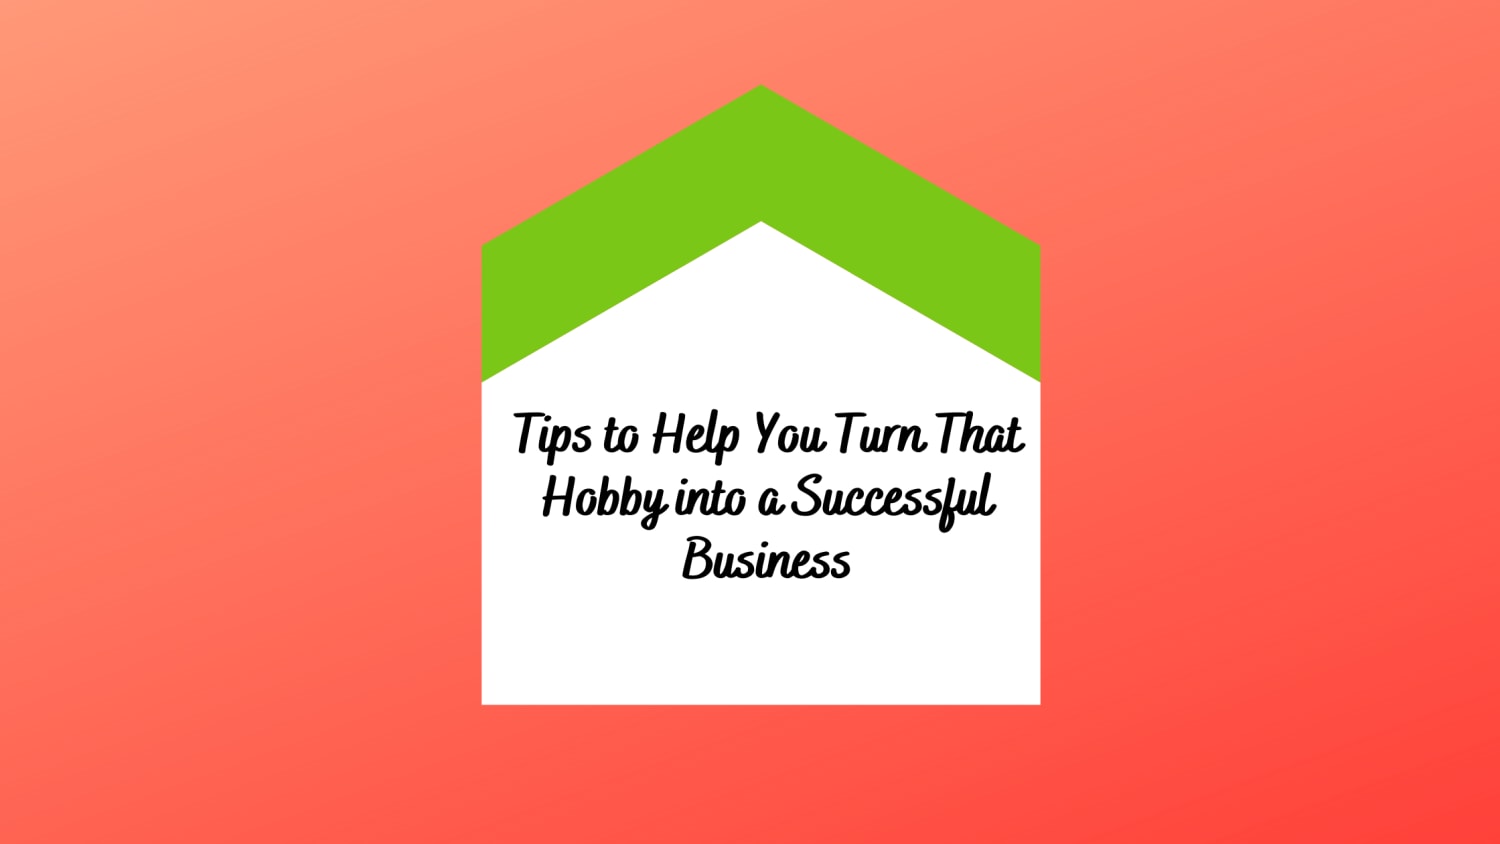 Tips to Help You Turn That Hobby into a Successful Business